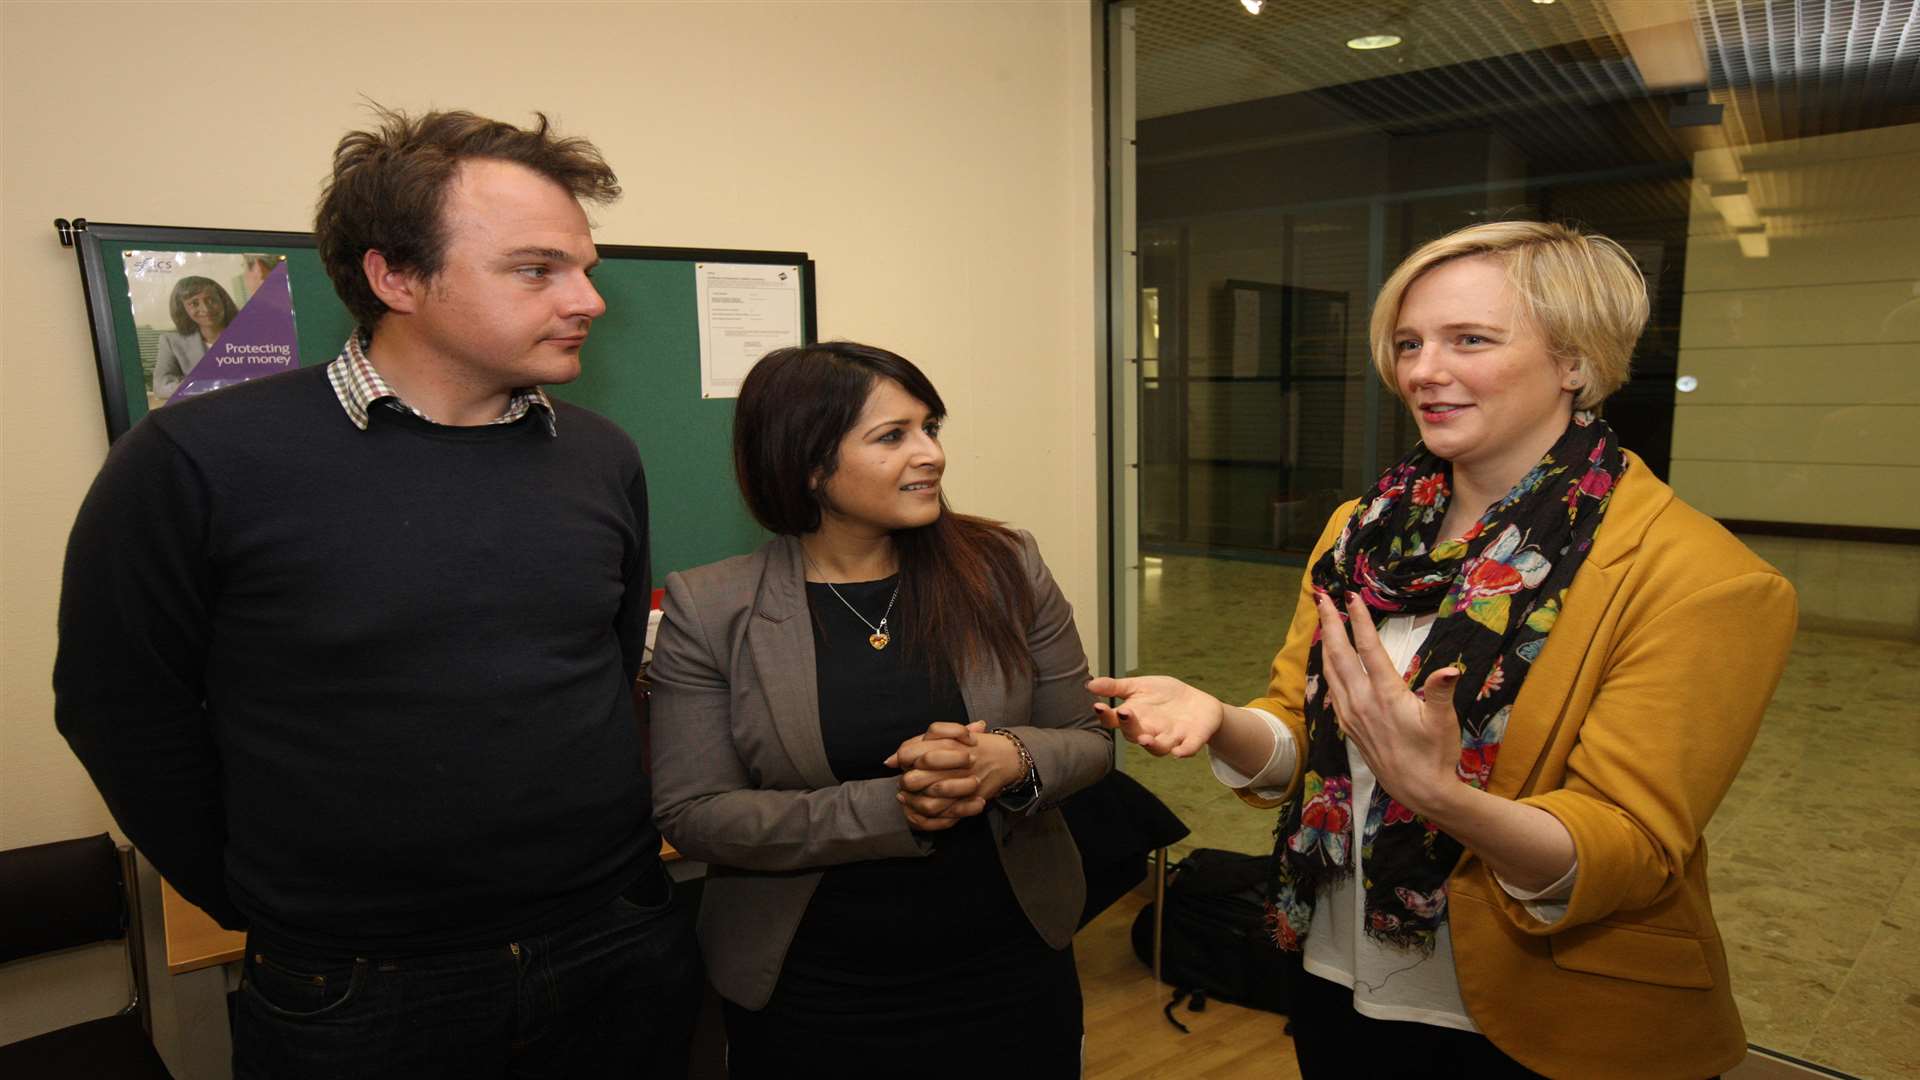 Labour parlimentary candidates Tristan Osborne and Naushabah Khan with Stella Creasy. Picture: John Westhrop.